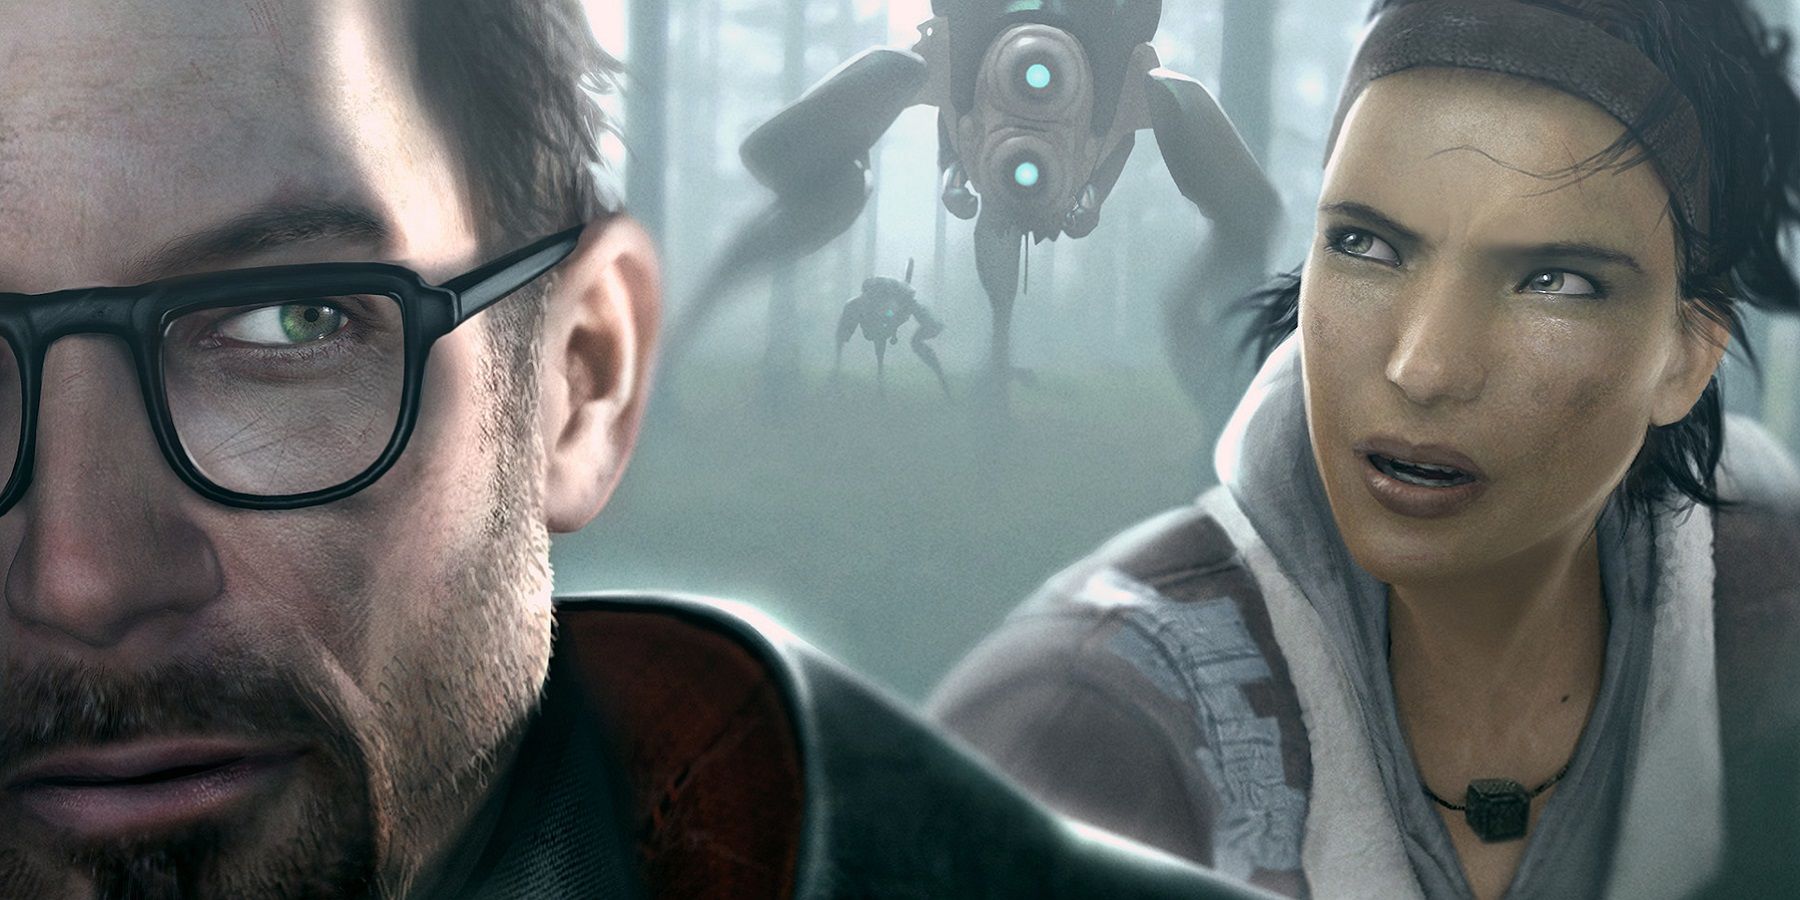 Image from Half-Life 2 showing Gordon and Alyx close to the camera with a Hunter behind them.